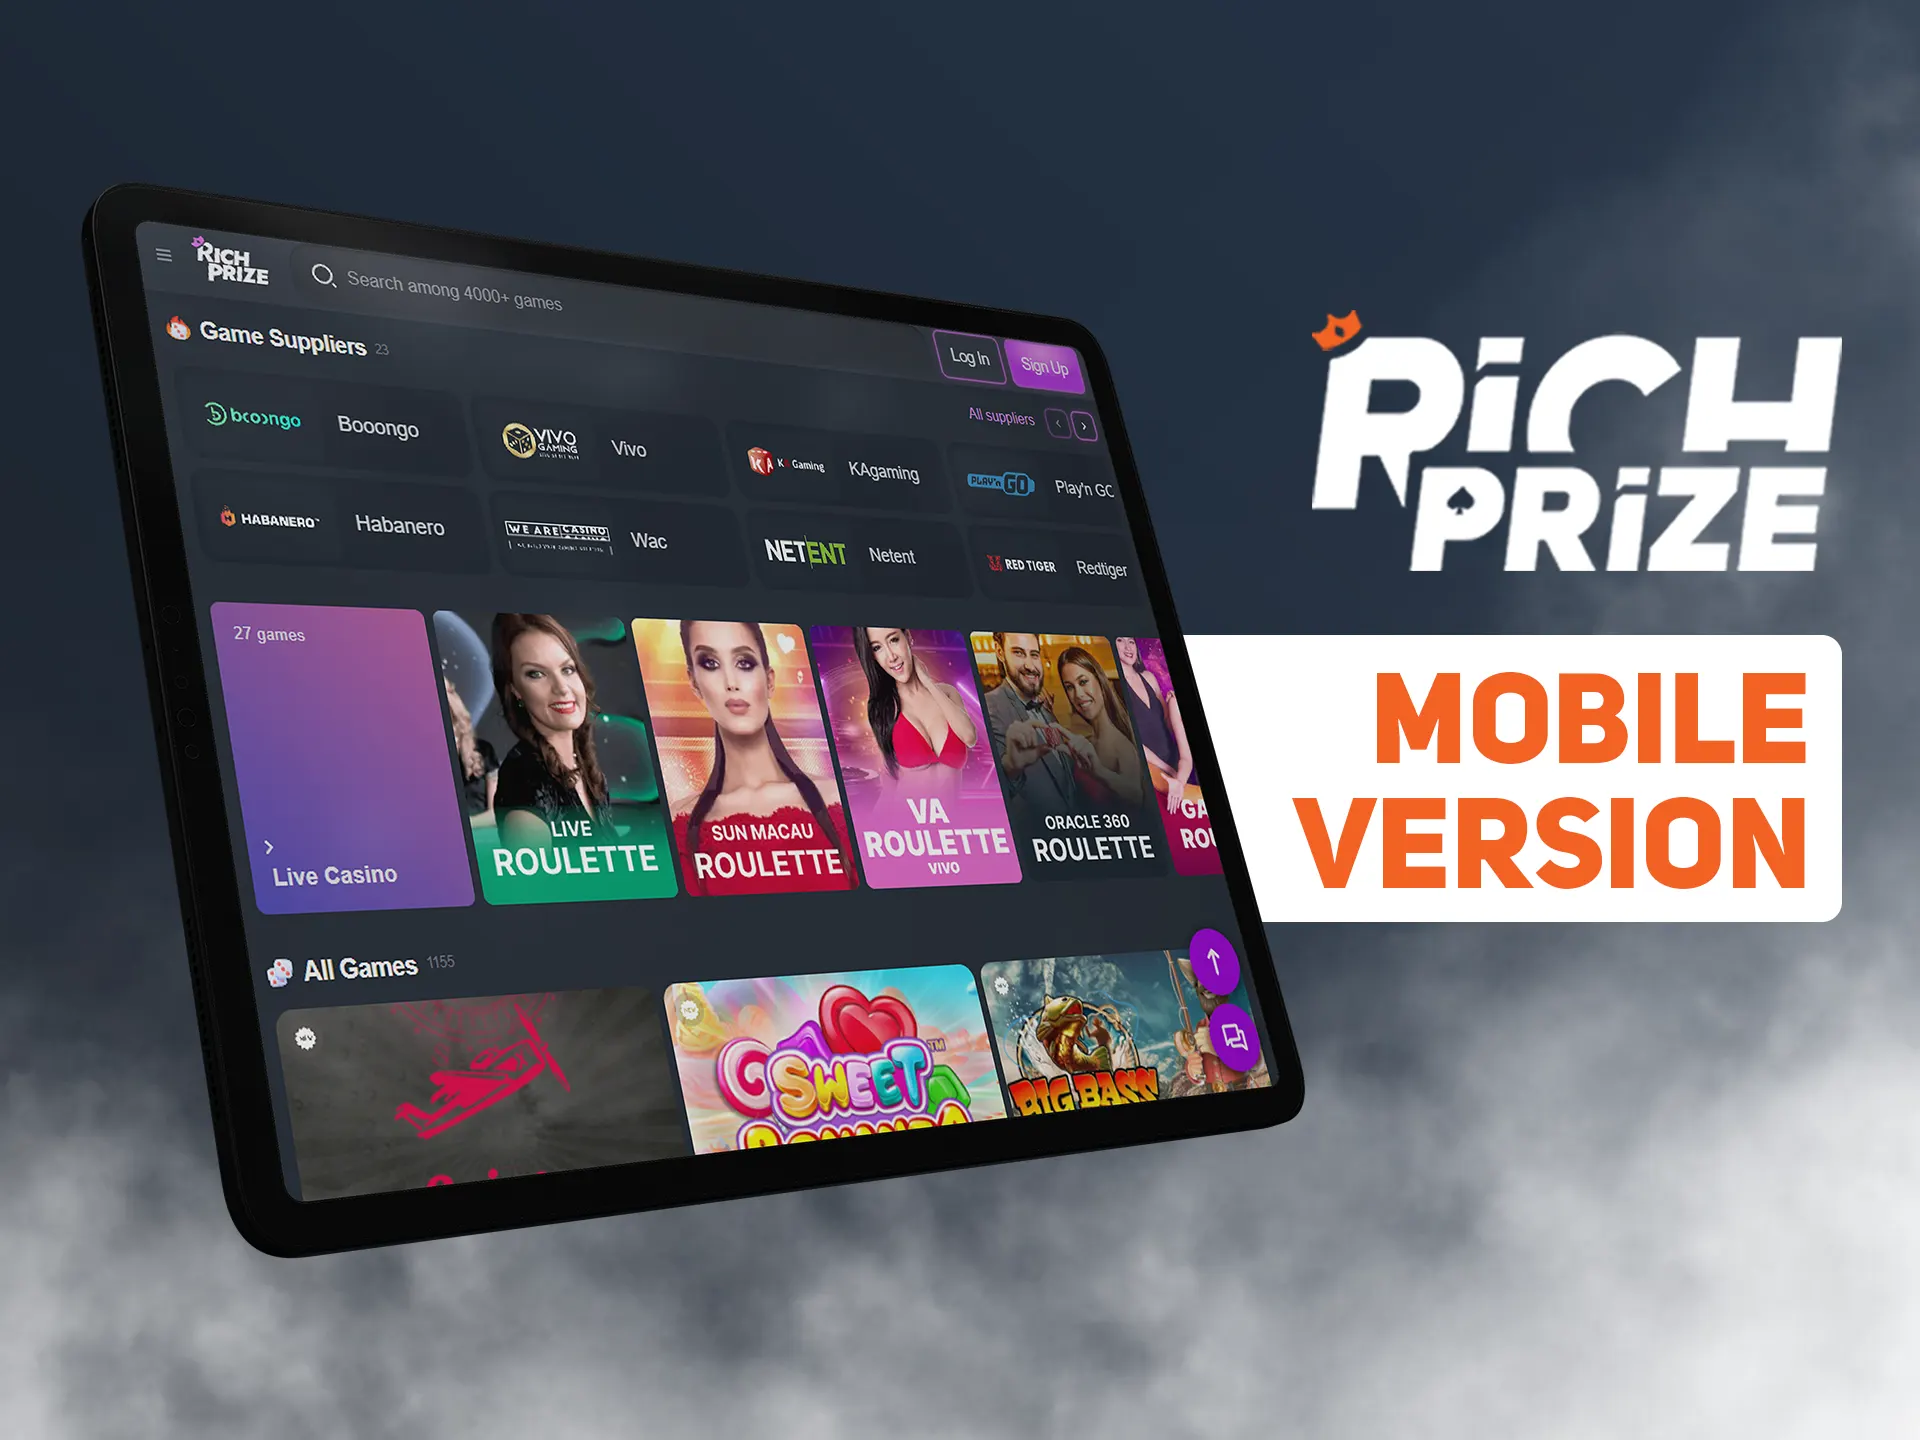 Use Richprize mobile version on any mobile device.